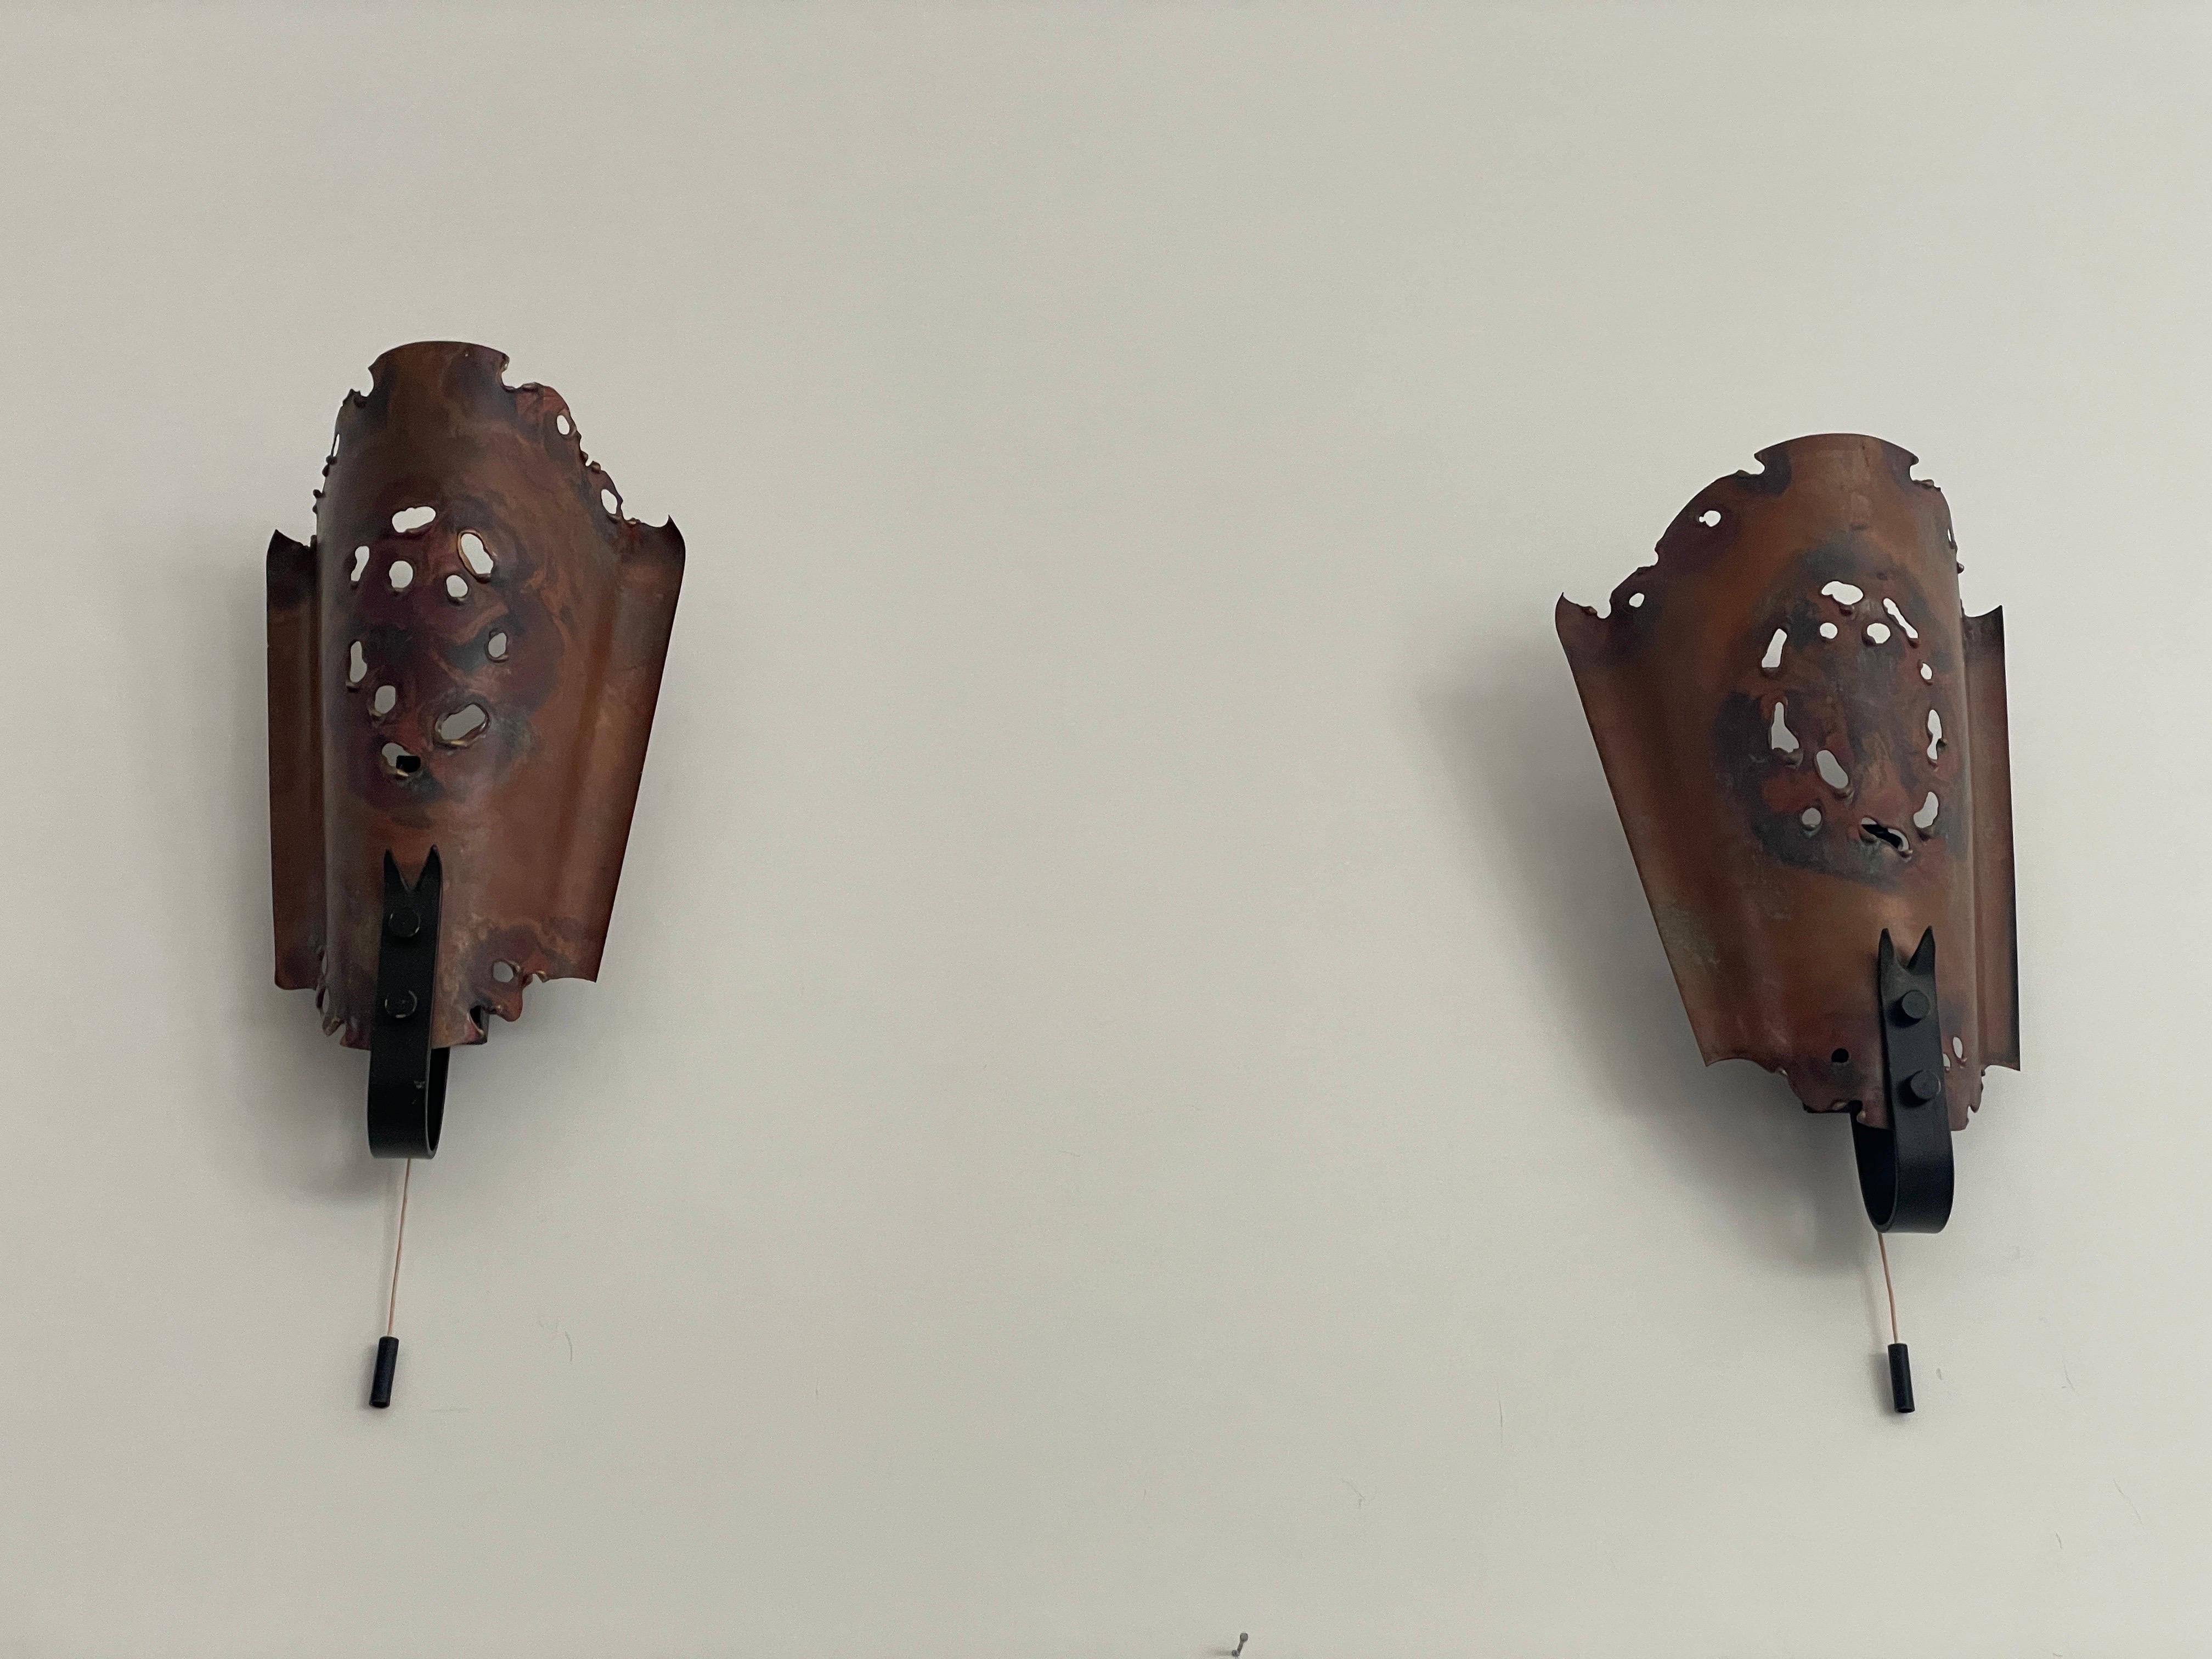 Brutalist Style Copper Pair of Sconces, 1960s, Germany

Very elegant and Minimalist sconces

9 pieces available

Lamps are in very good condition.

These lamps works with standart E14 light bulbs. 
Wired and suitable to use in all countries.